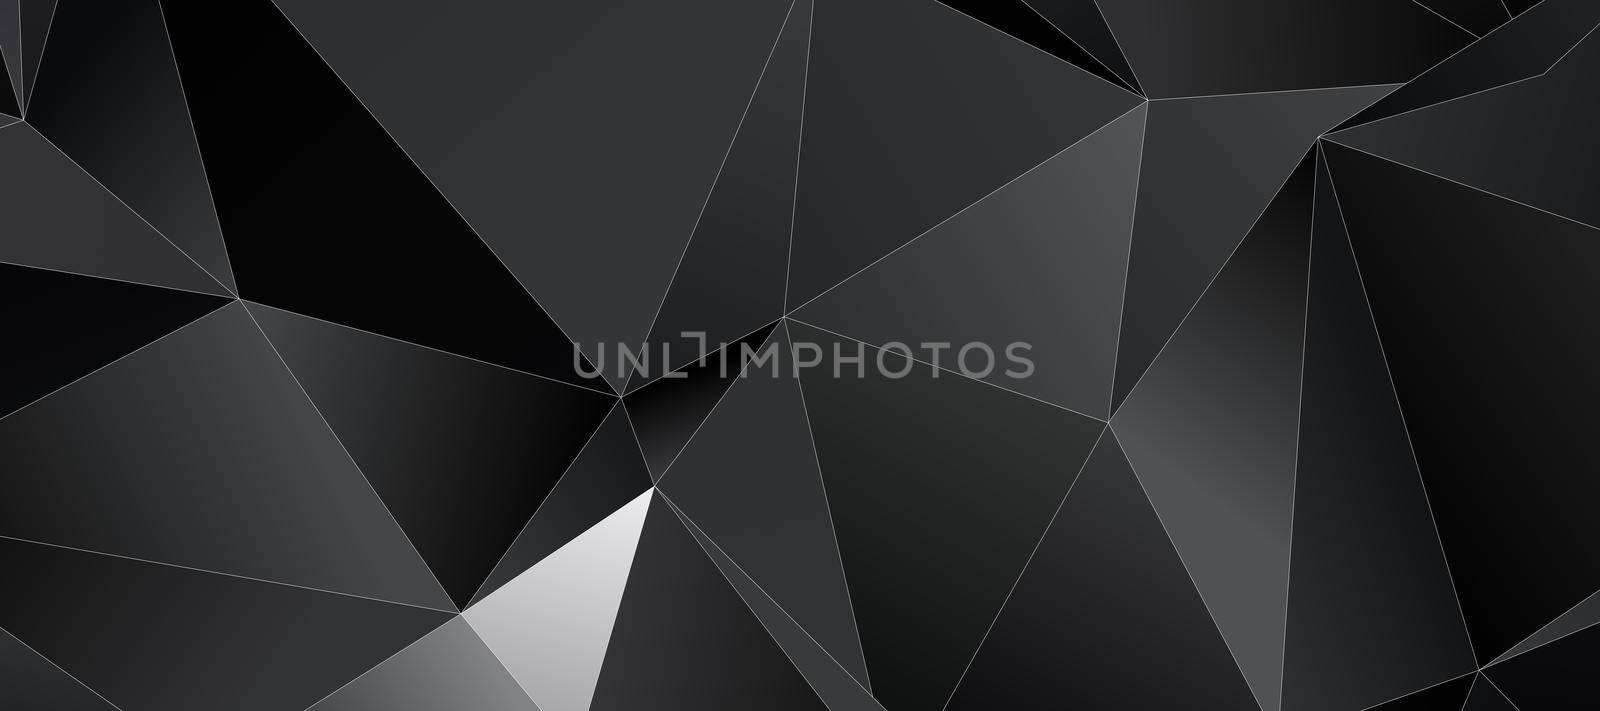 Abstract black triangle background with thin white stroke by dutourdumonde